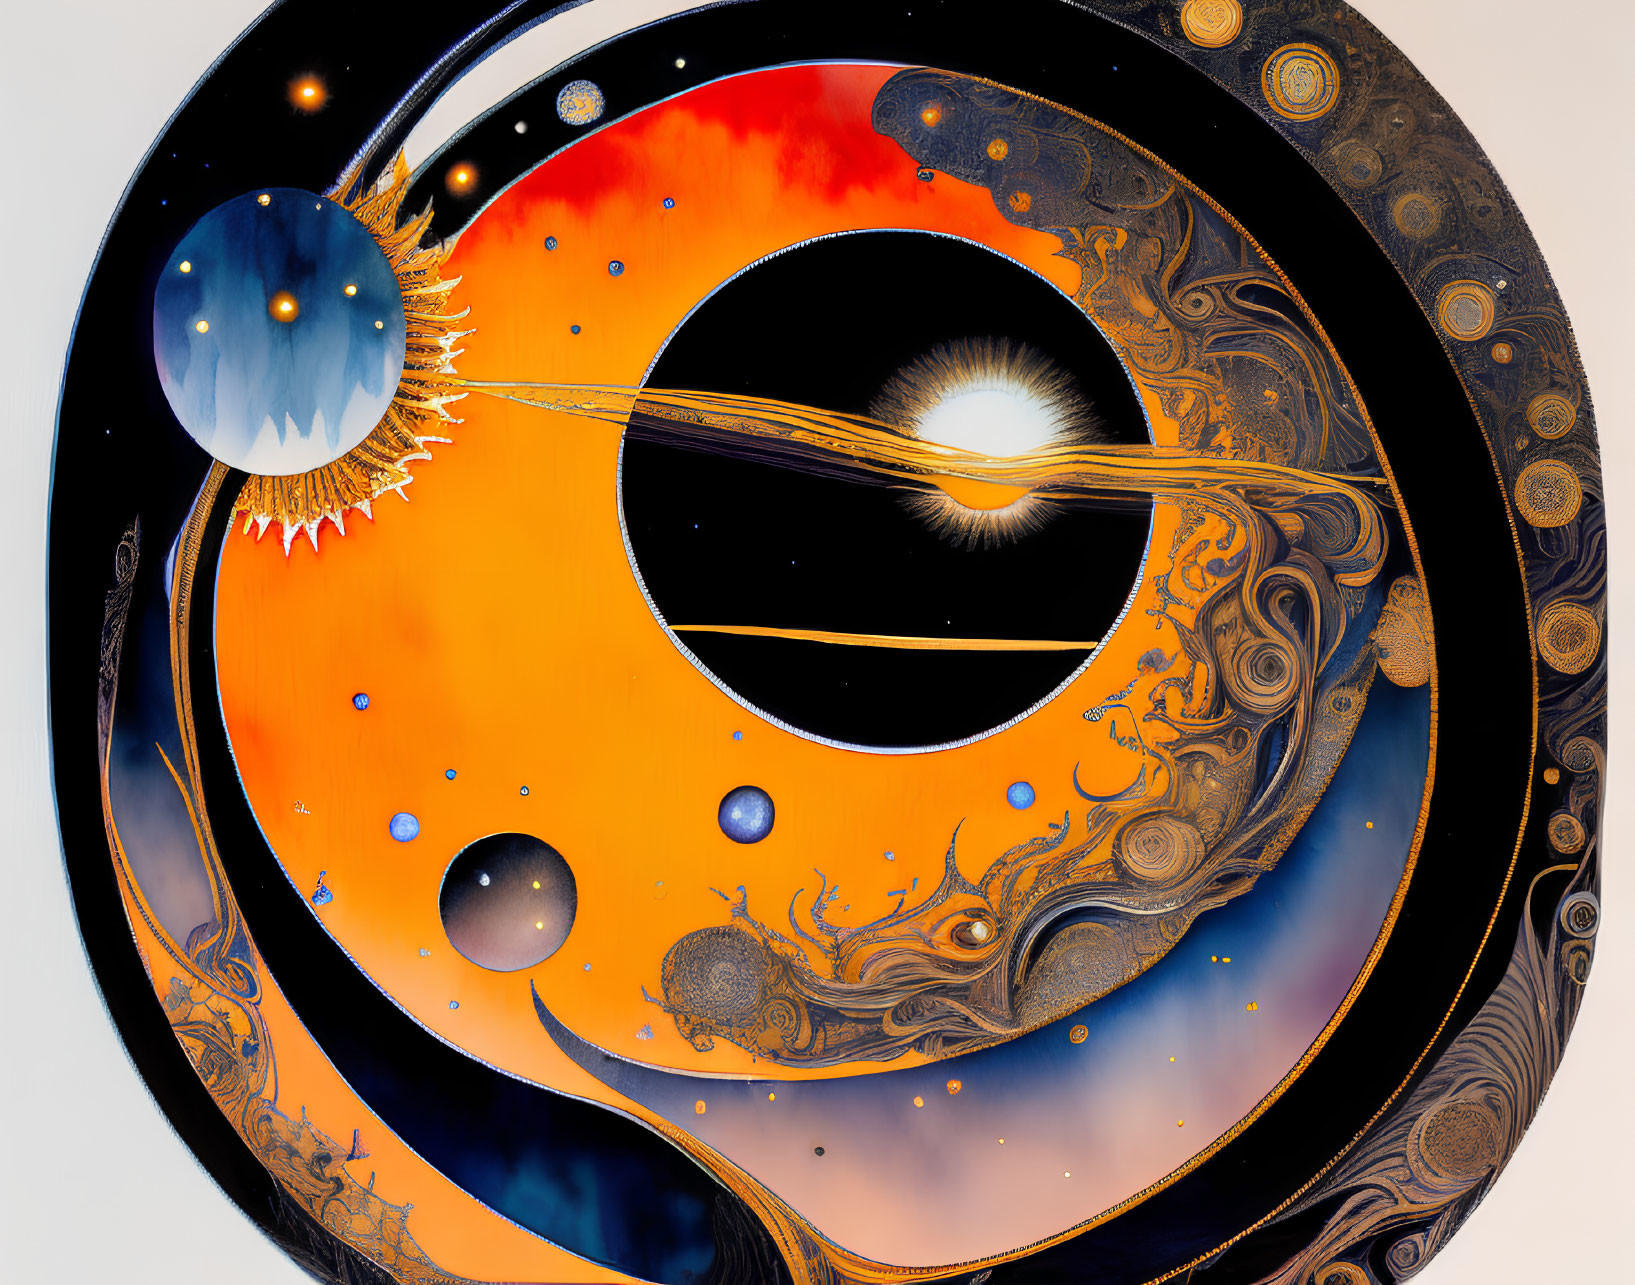 Colorful Abstract Circular Painting of Celestial Bodies in Orange, Blue, and Black